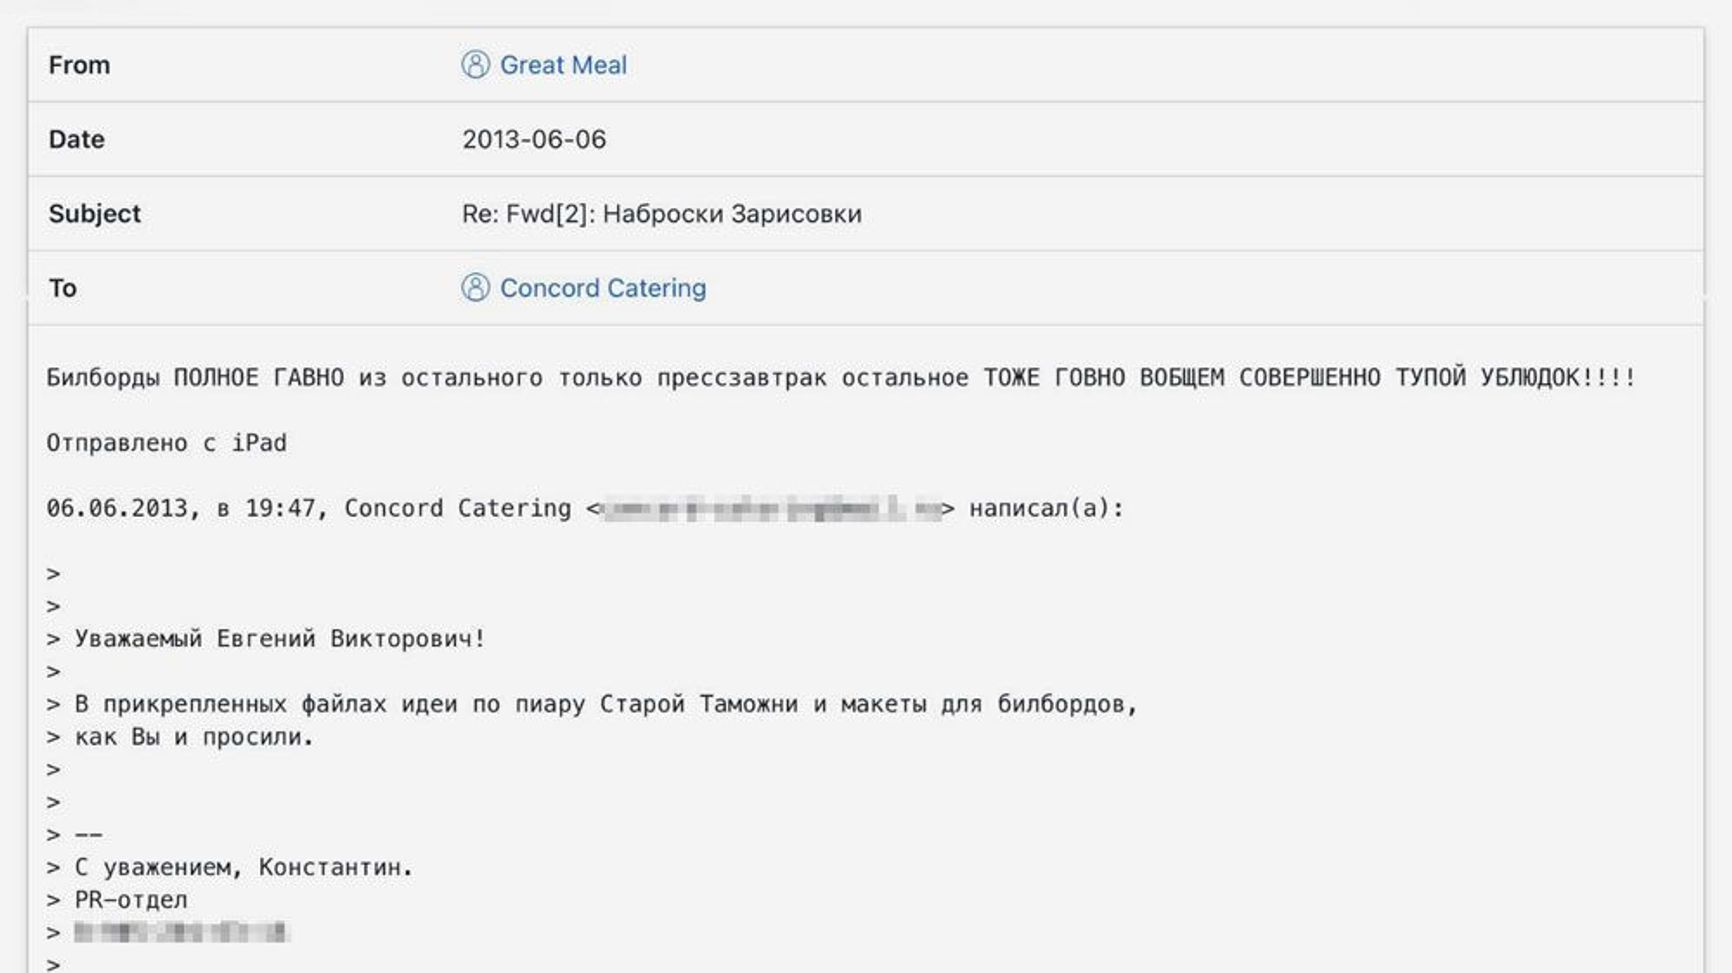 A letter discovered by Proekt in a leak of Prigozhin's corporate email (punctuation in quote unchanged)